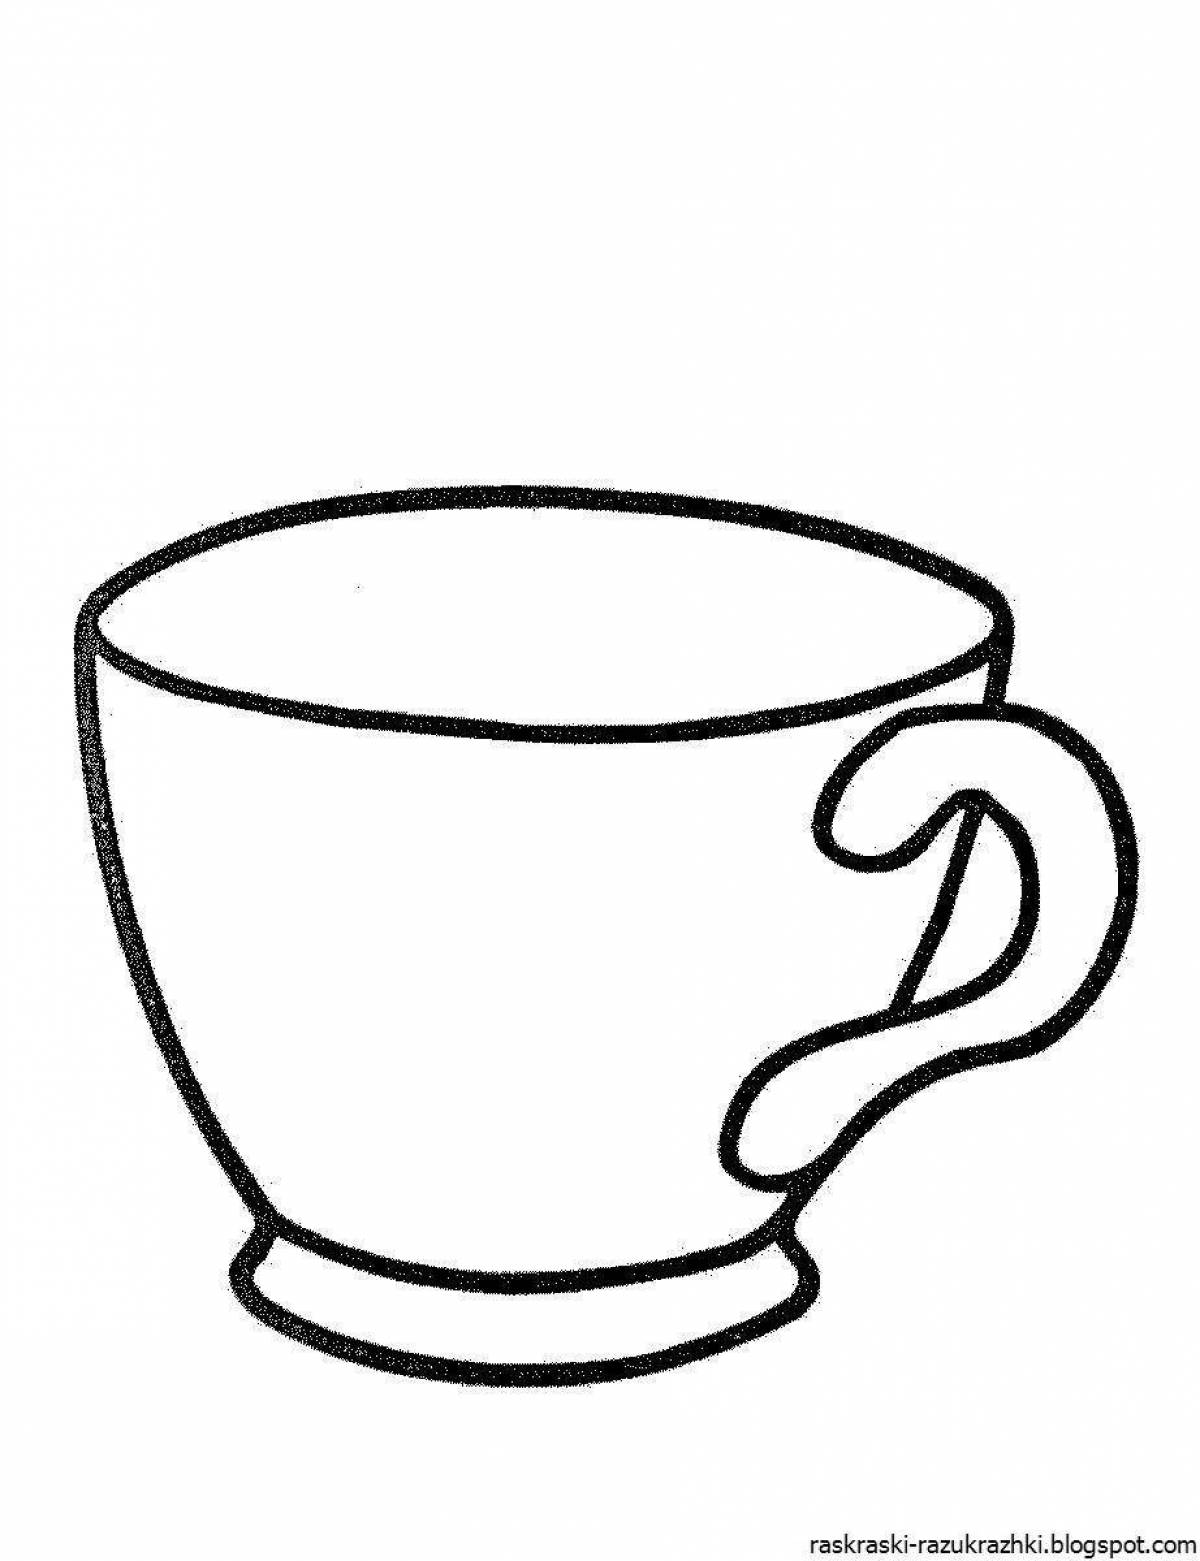 Coloring mug for children 4-5 years old